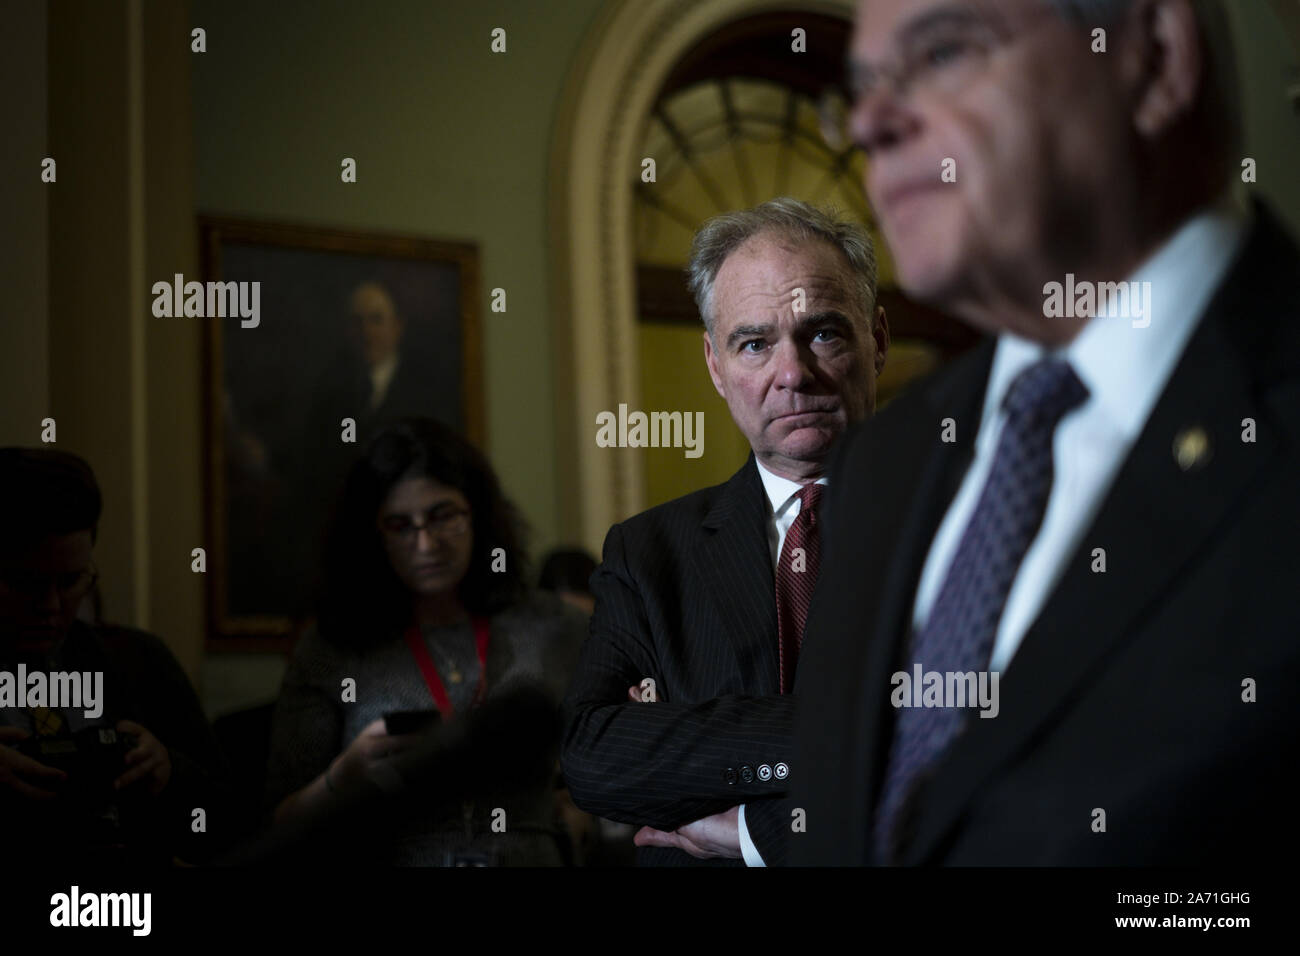 Washington, United States. 29th Oct, 2019. Senator Tim Kaine (D-VA) looks on as Senator Robert Menendez (D-NJ) speak to reporters following the Democrats' weekly policy luncheon in the U.S. Capitol on Tuesday, October 29, 2019 in Washington, DC. Senate Majority Leader, Senator Chuck Schumer (D-NY) said he is 'increasingly worried' that President Trump will shut down the government to distract from the impeachment inquiry. Photo by Pete Marovich/UPI Credit: UPI/Alamy Live News Stock Photo